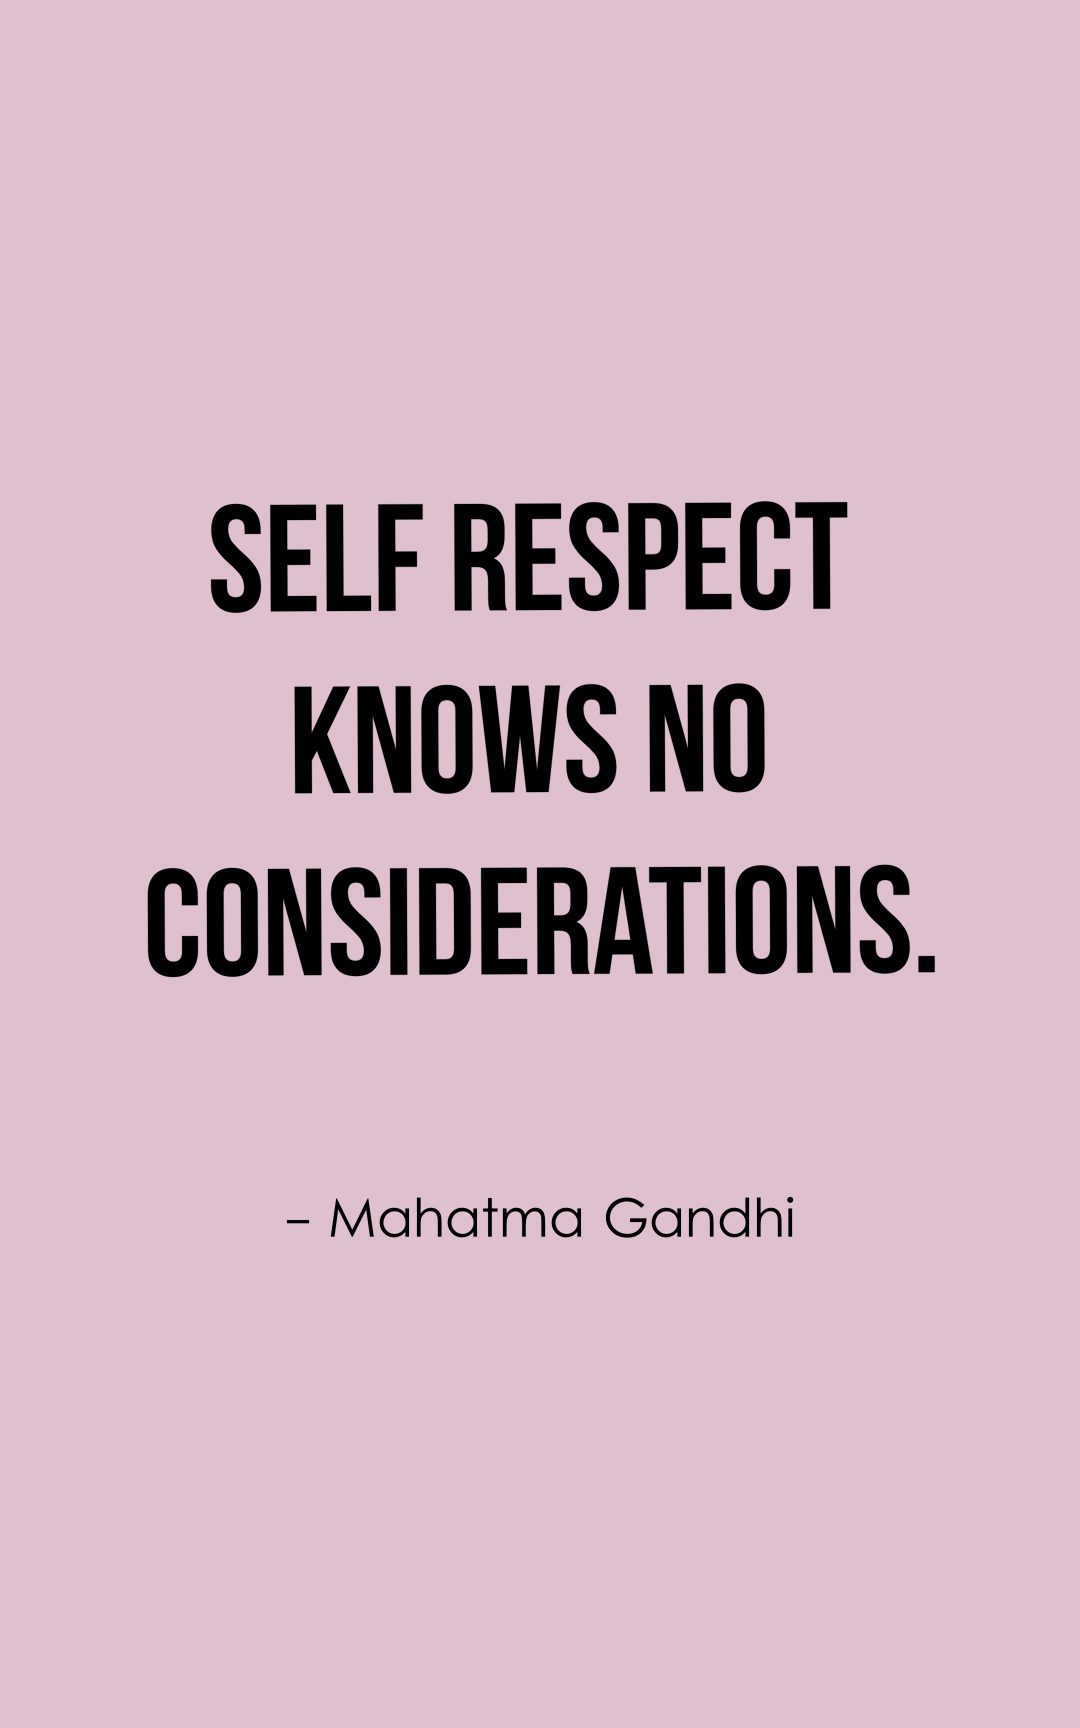 Self respect knows no considerations.